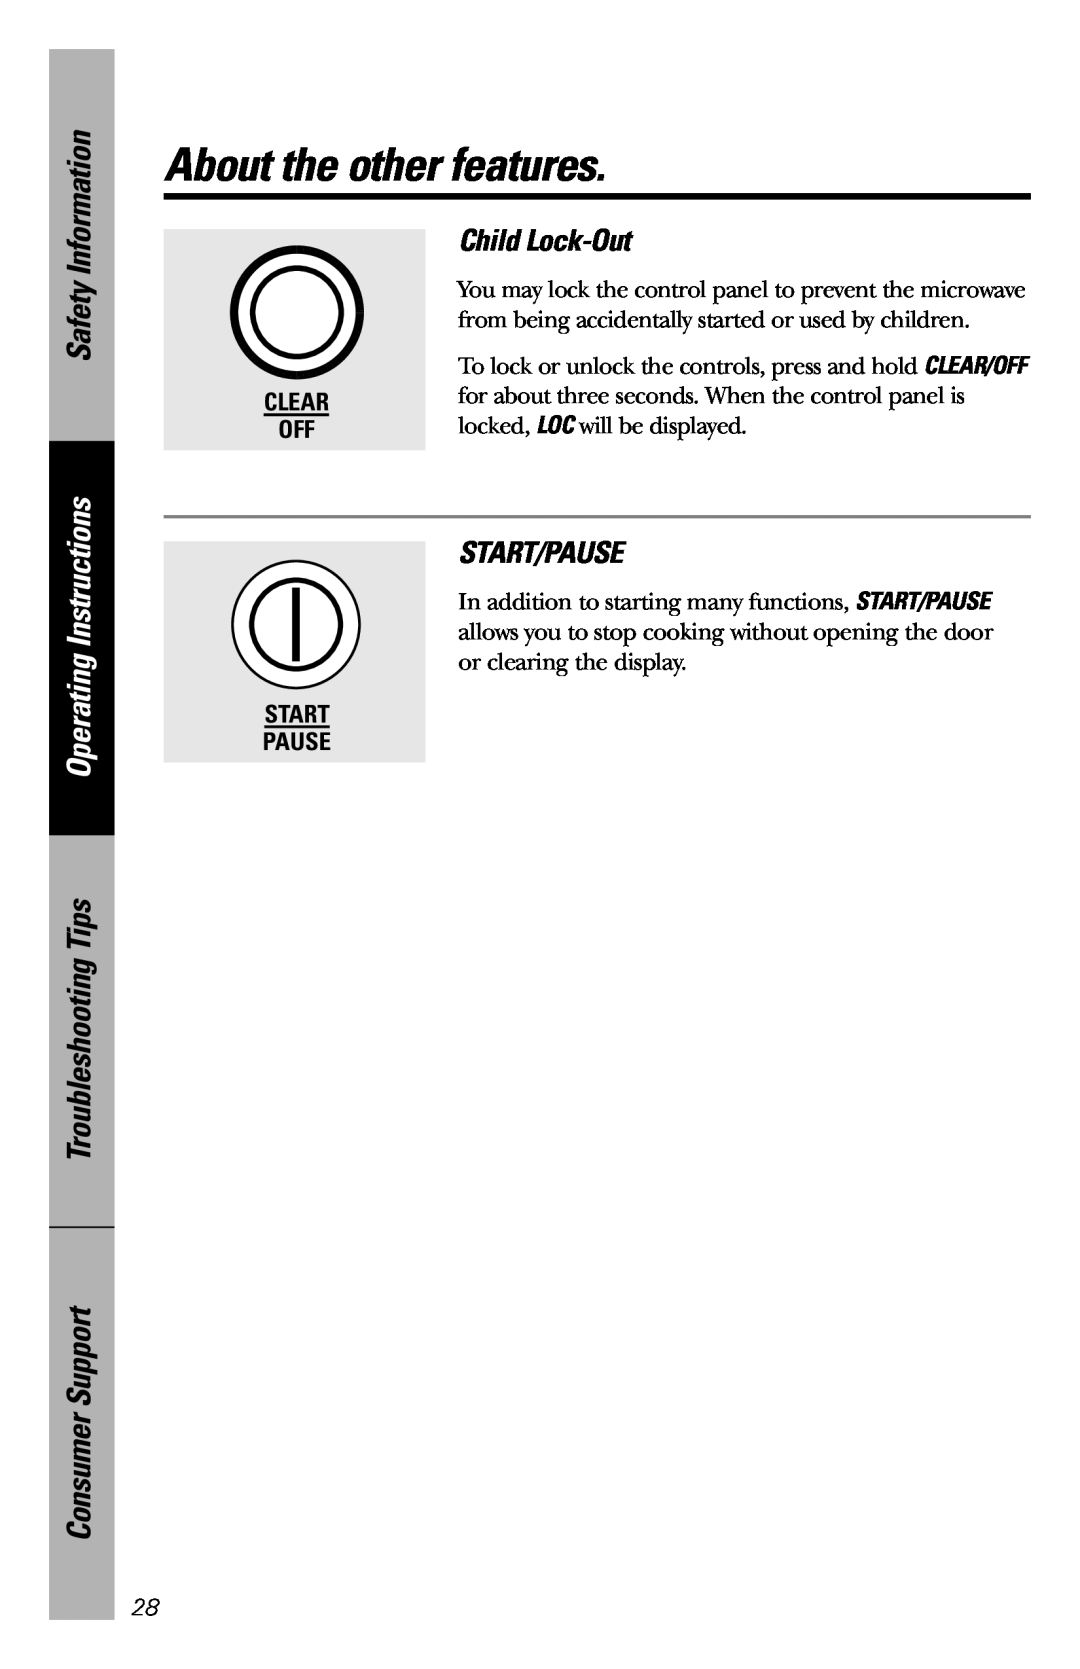 GE JES1034 Child Lock-Out, Operating Instructions, Start/Pause, About the other features, Safety Information, Start Pause 